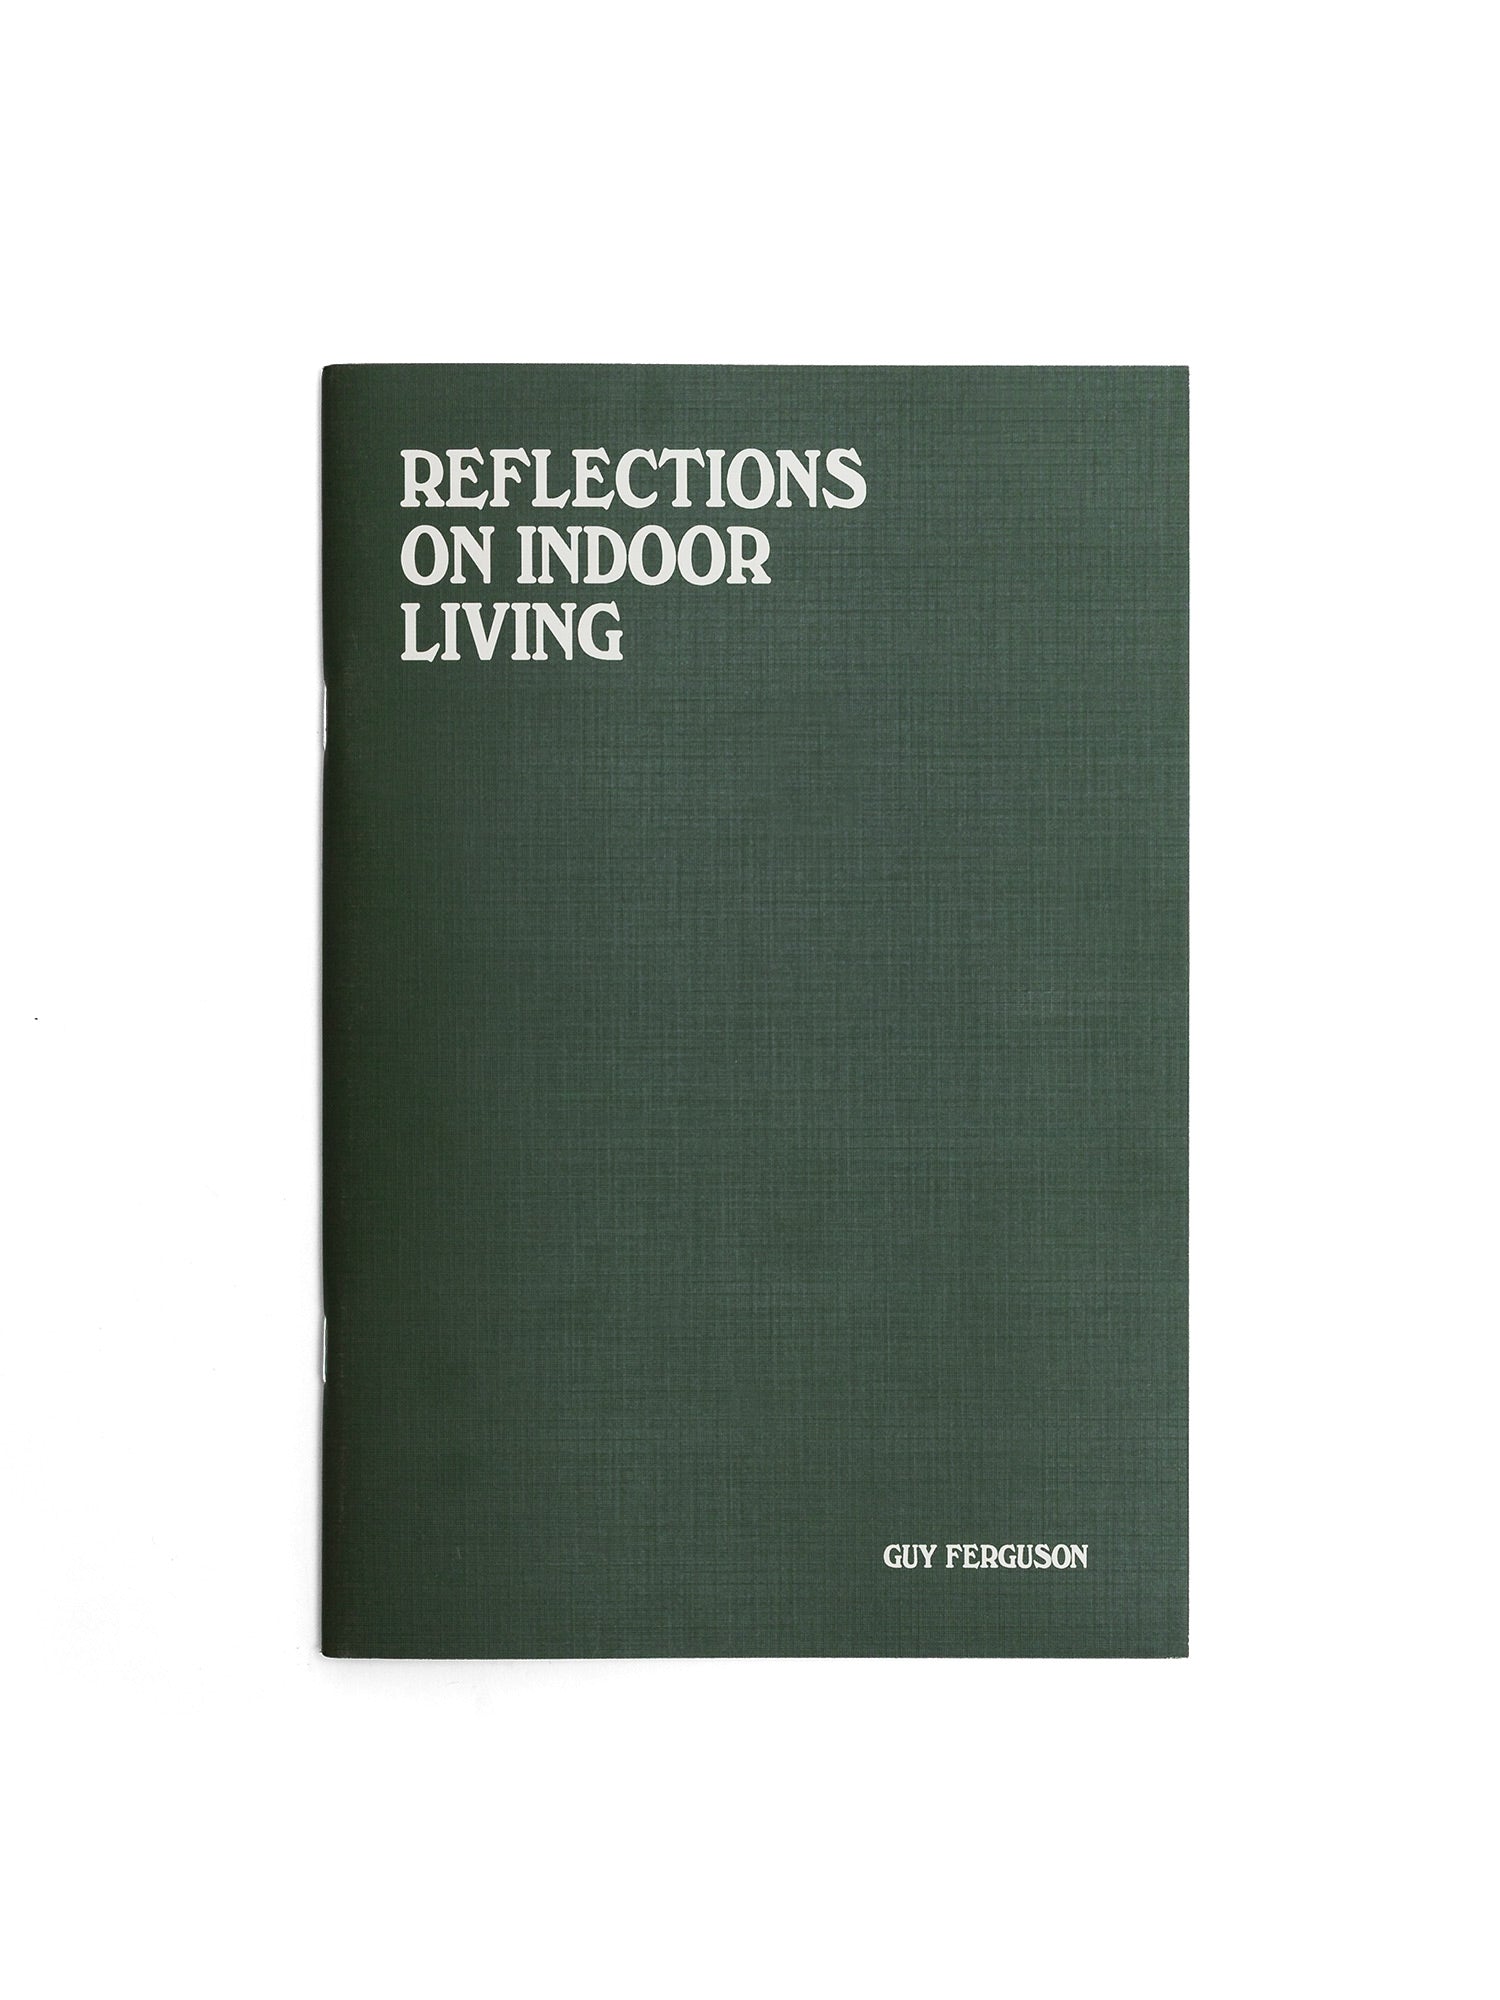 Reflections on Indoor Living